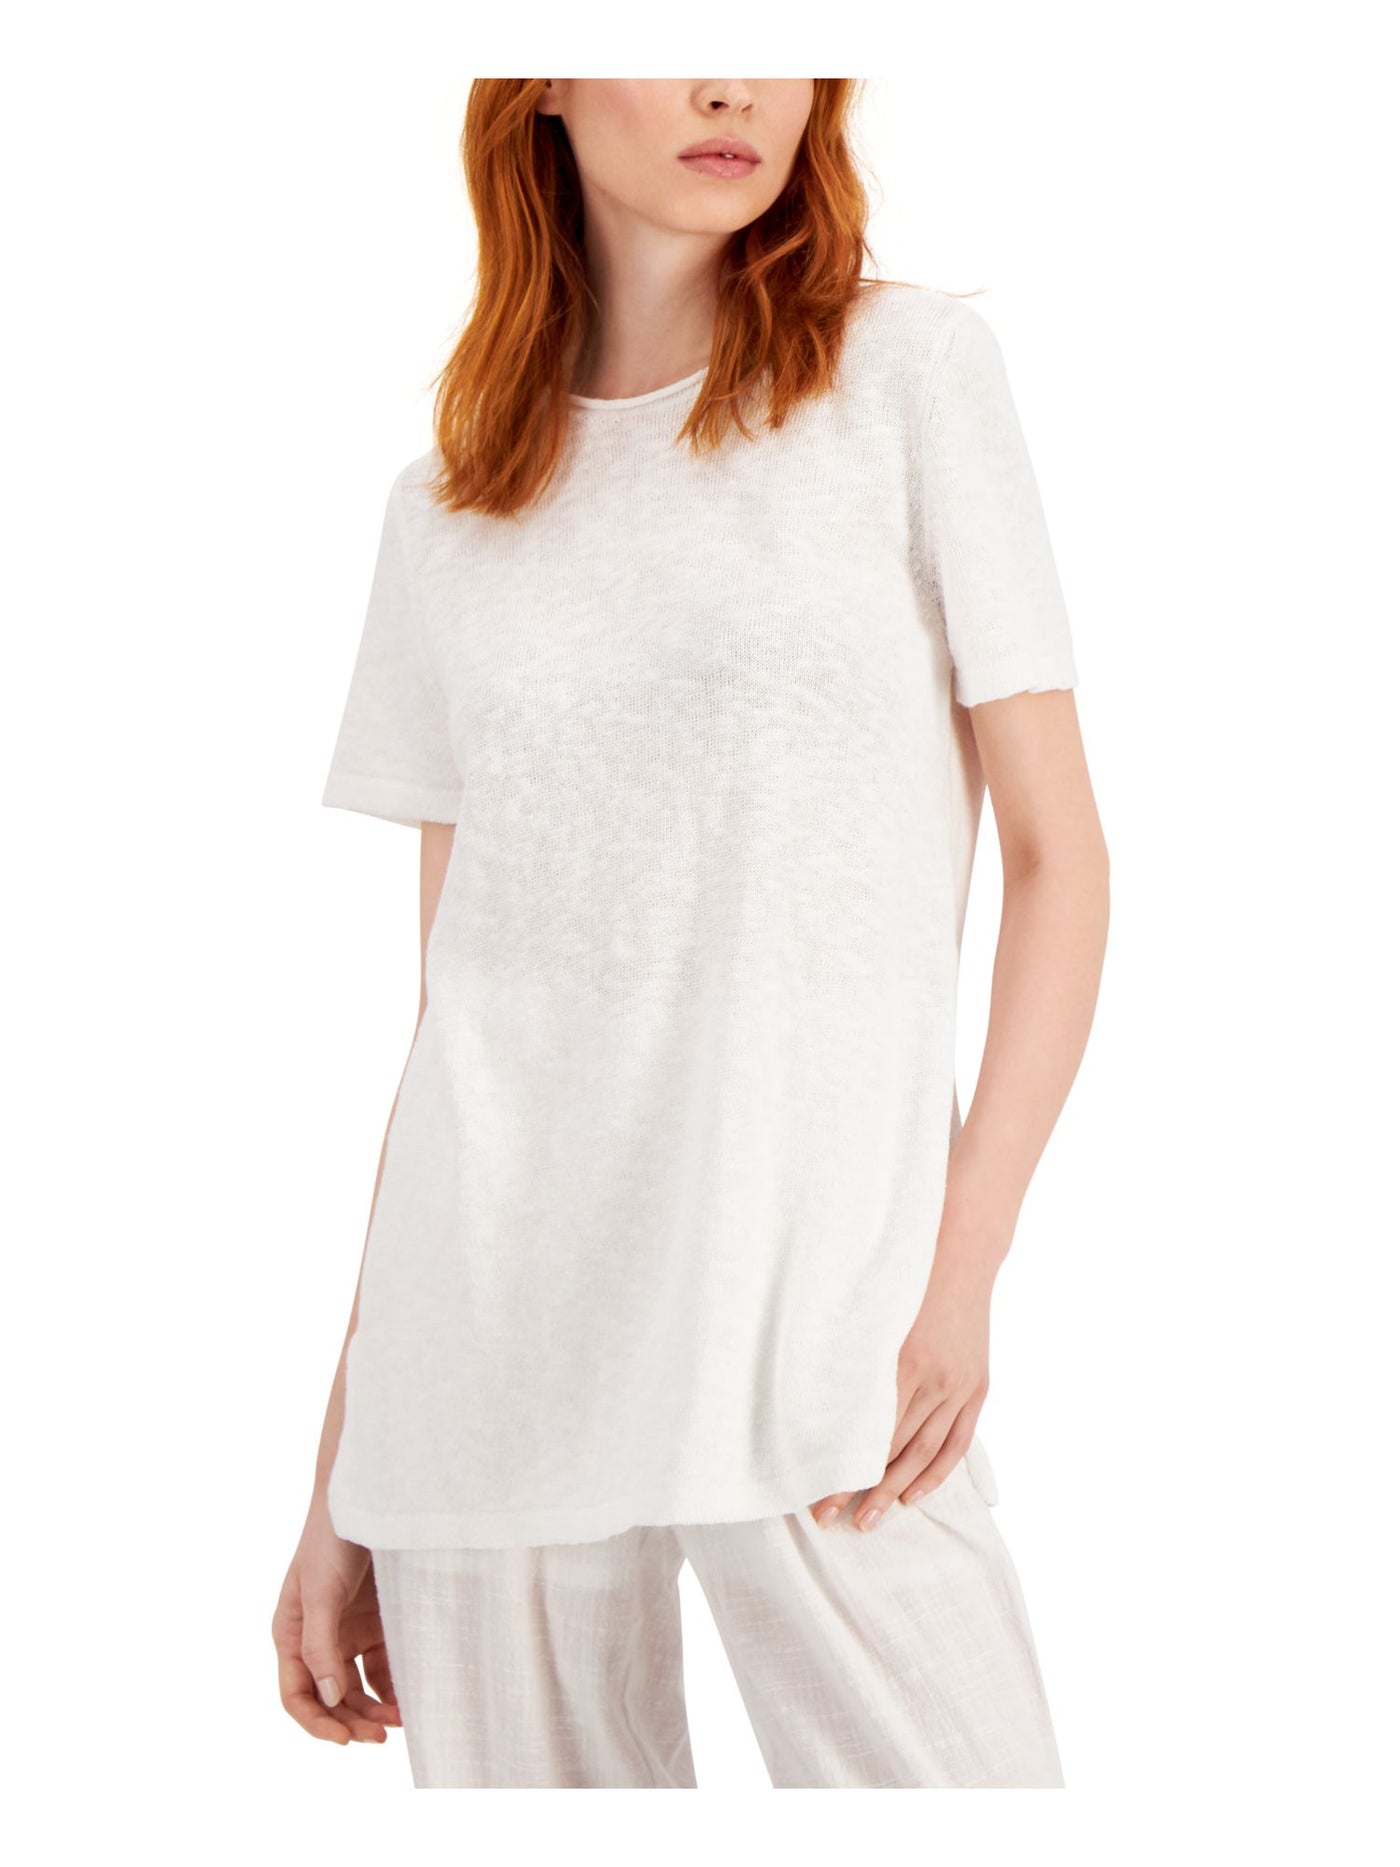 EILEEN FISHER Womens White Slitted Short Sleeve Crew Neck Wear To Work Tunic Top S